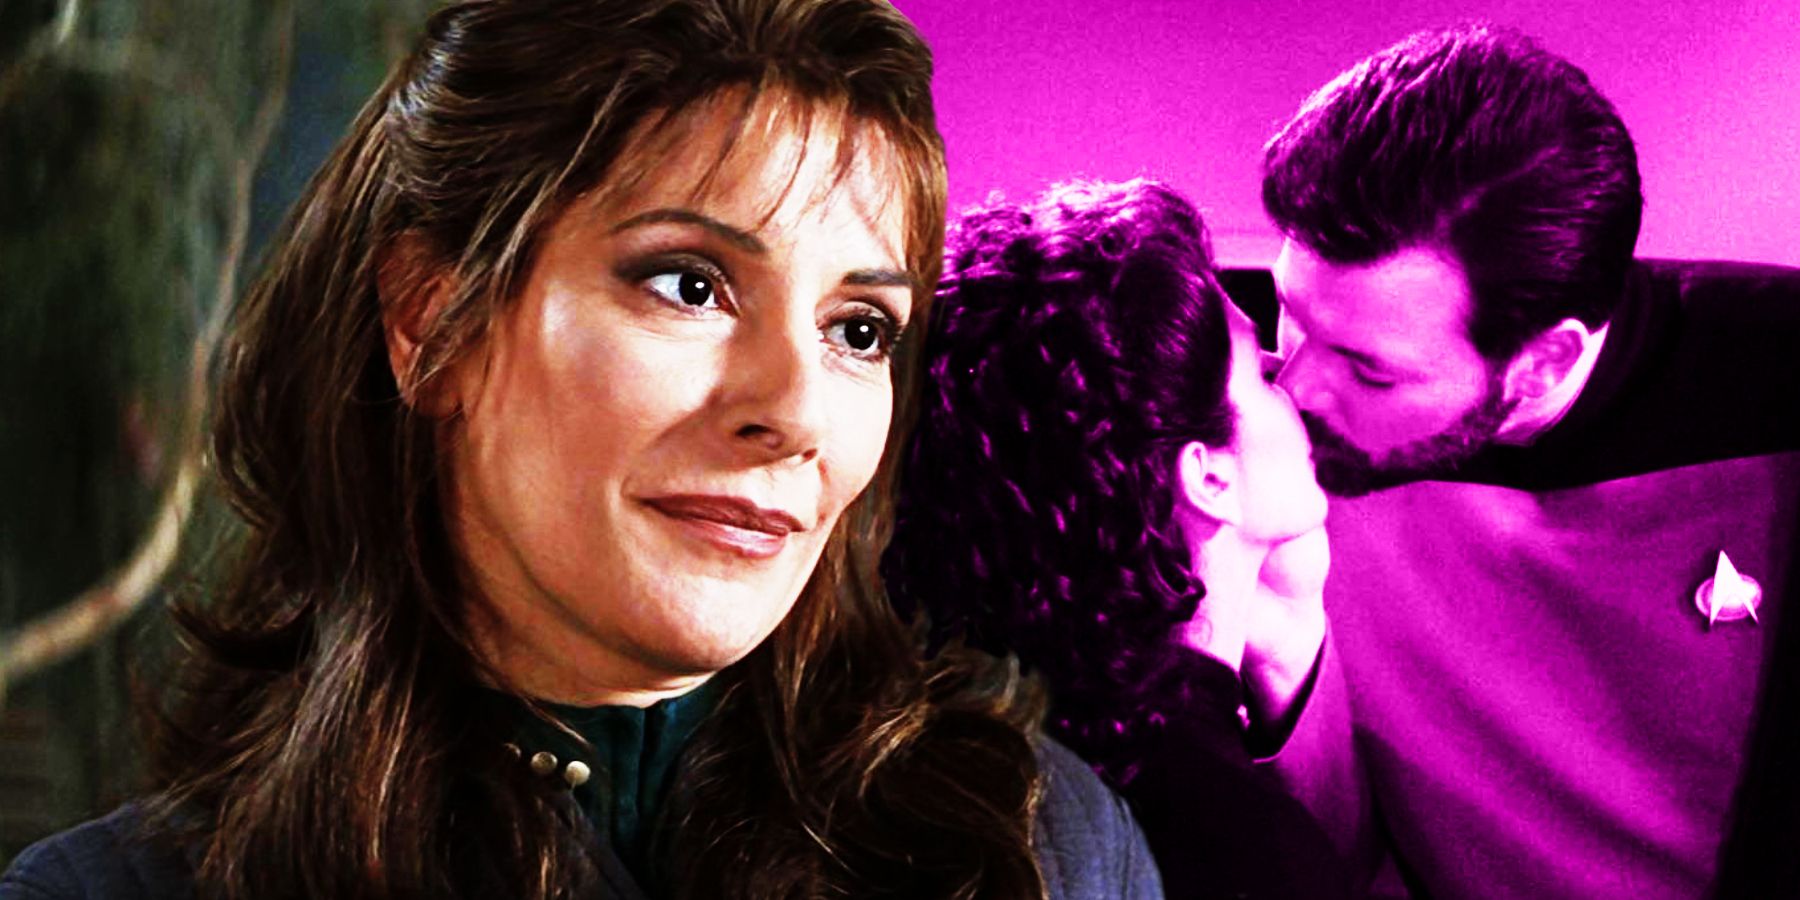 Deanna Troi in Insurrection and Troi and Tom Riker kiss in TNG